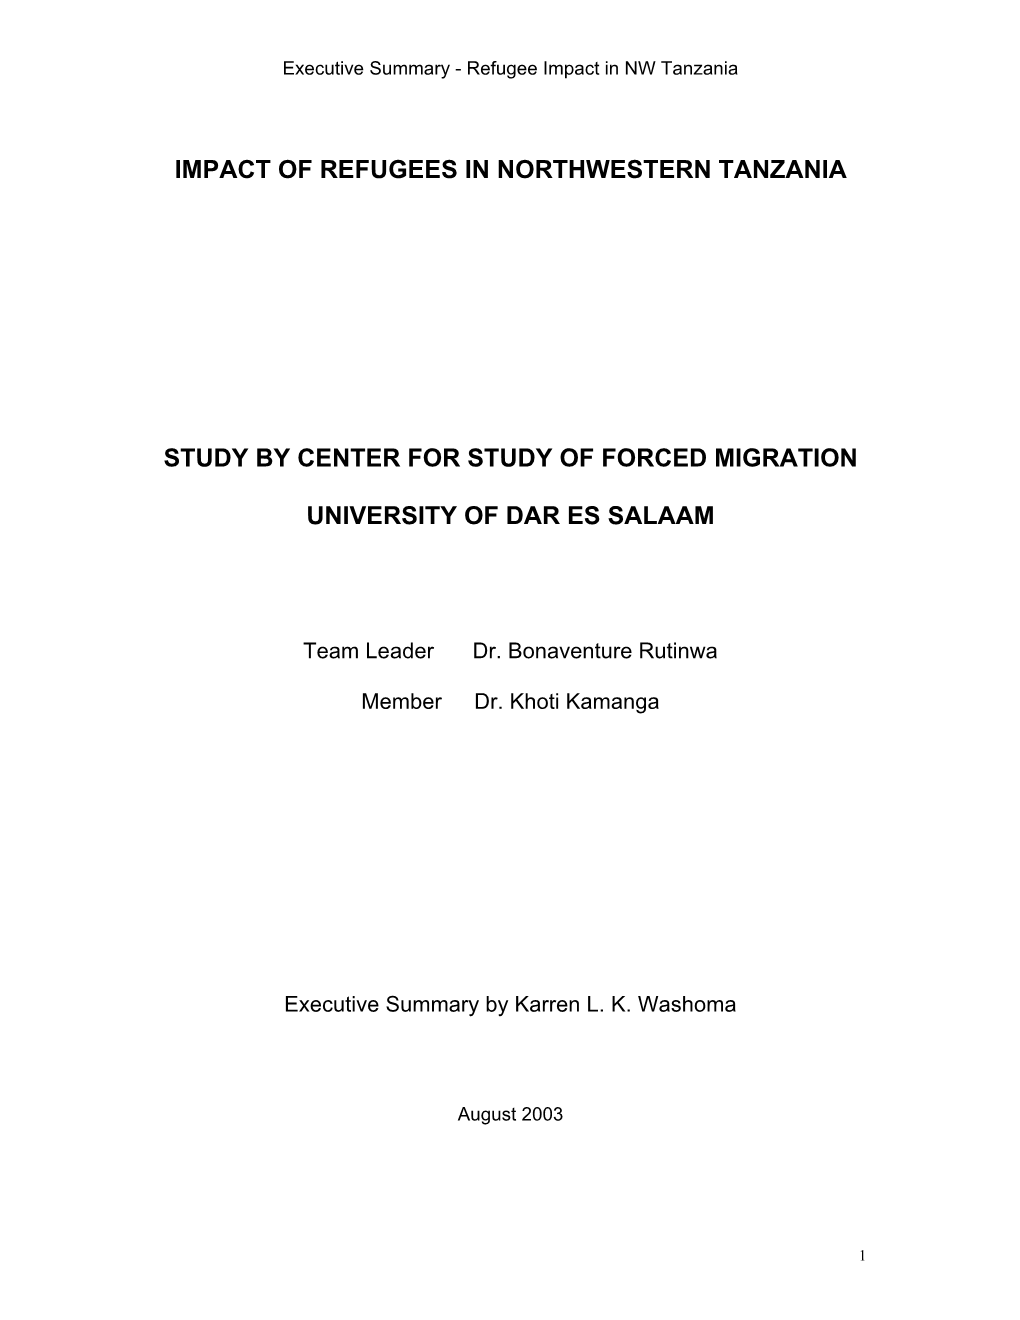 Impact of Refugees in North Western Tanzania